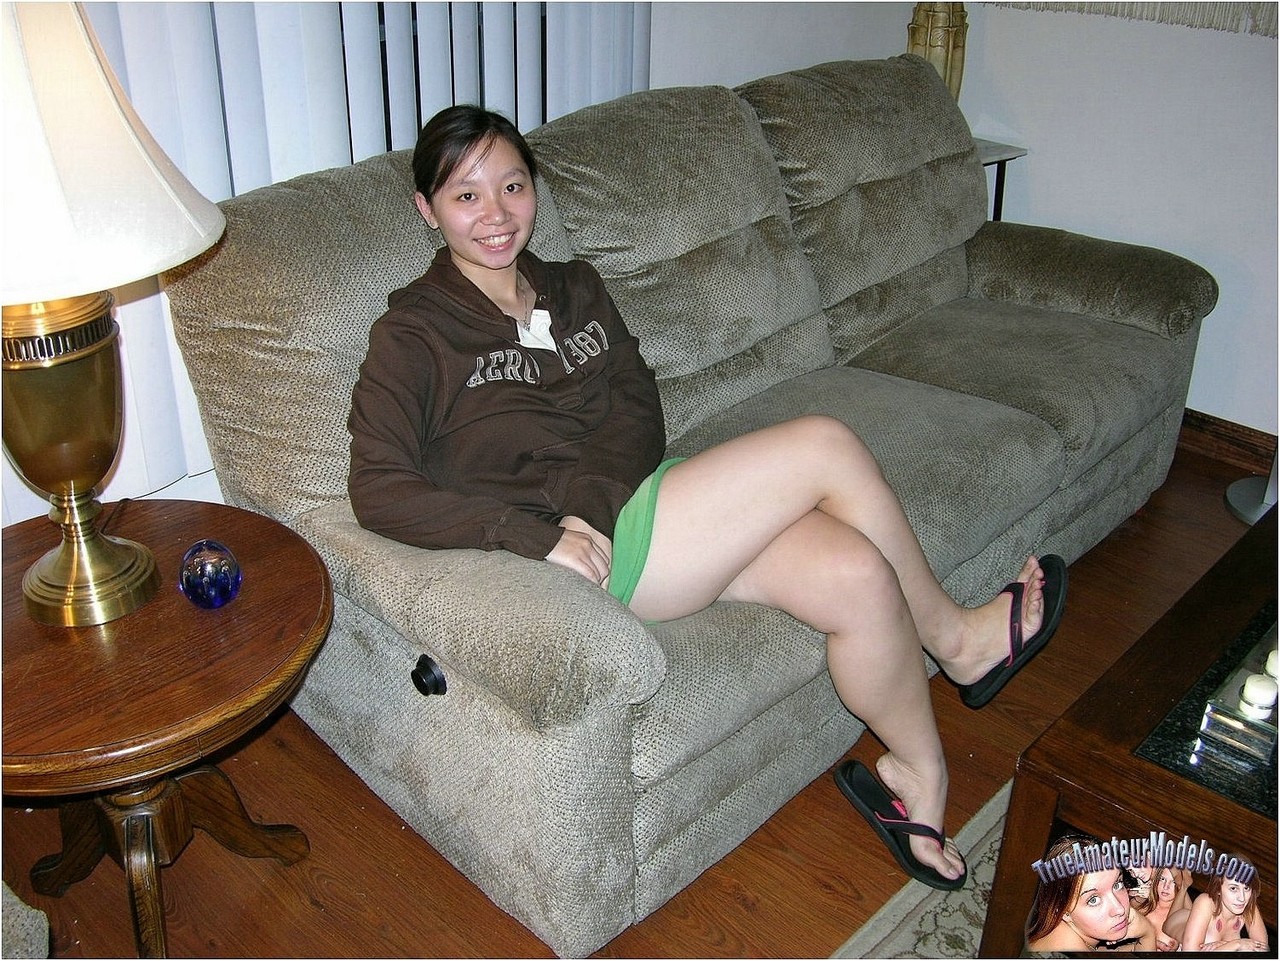 Barely legal Asian girl wears nothing more than a smile while showing her twat foto porno #424574537